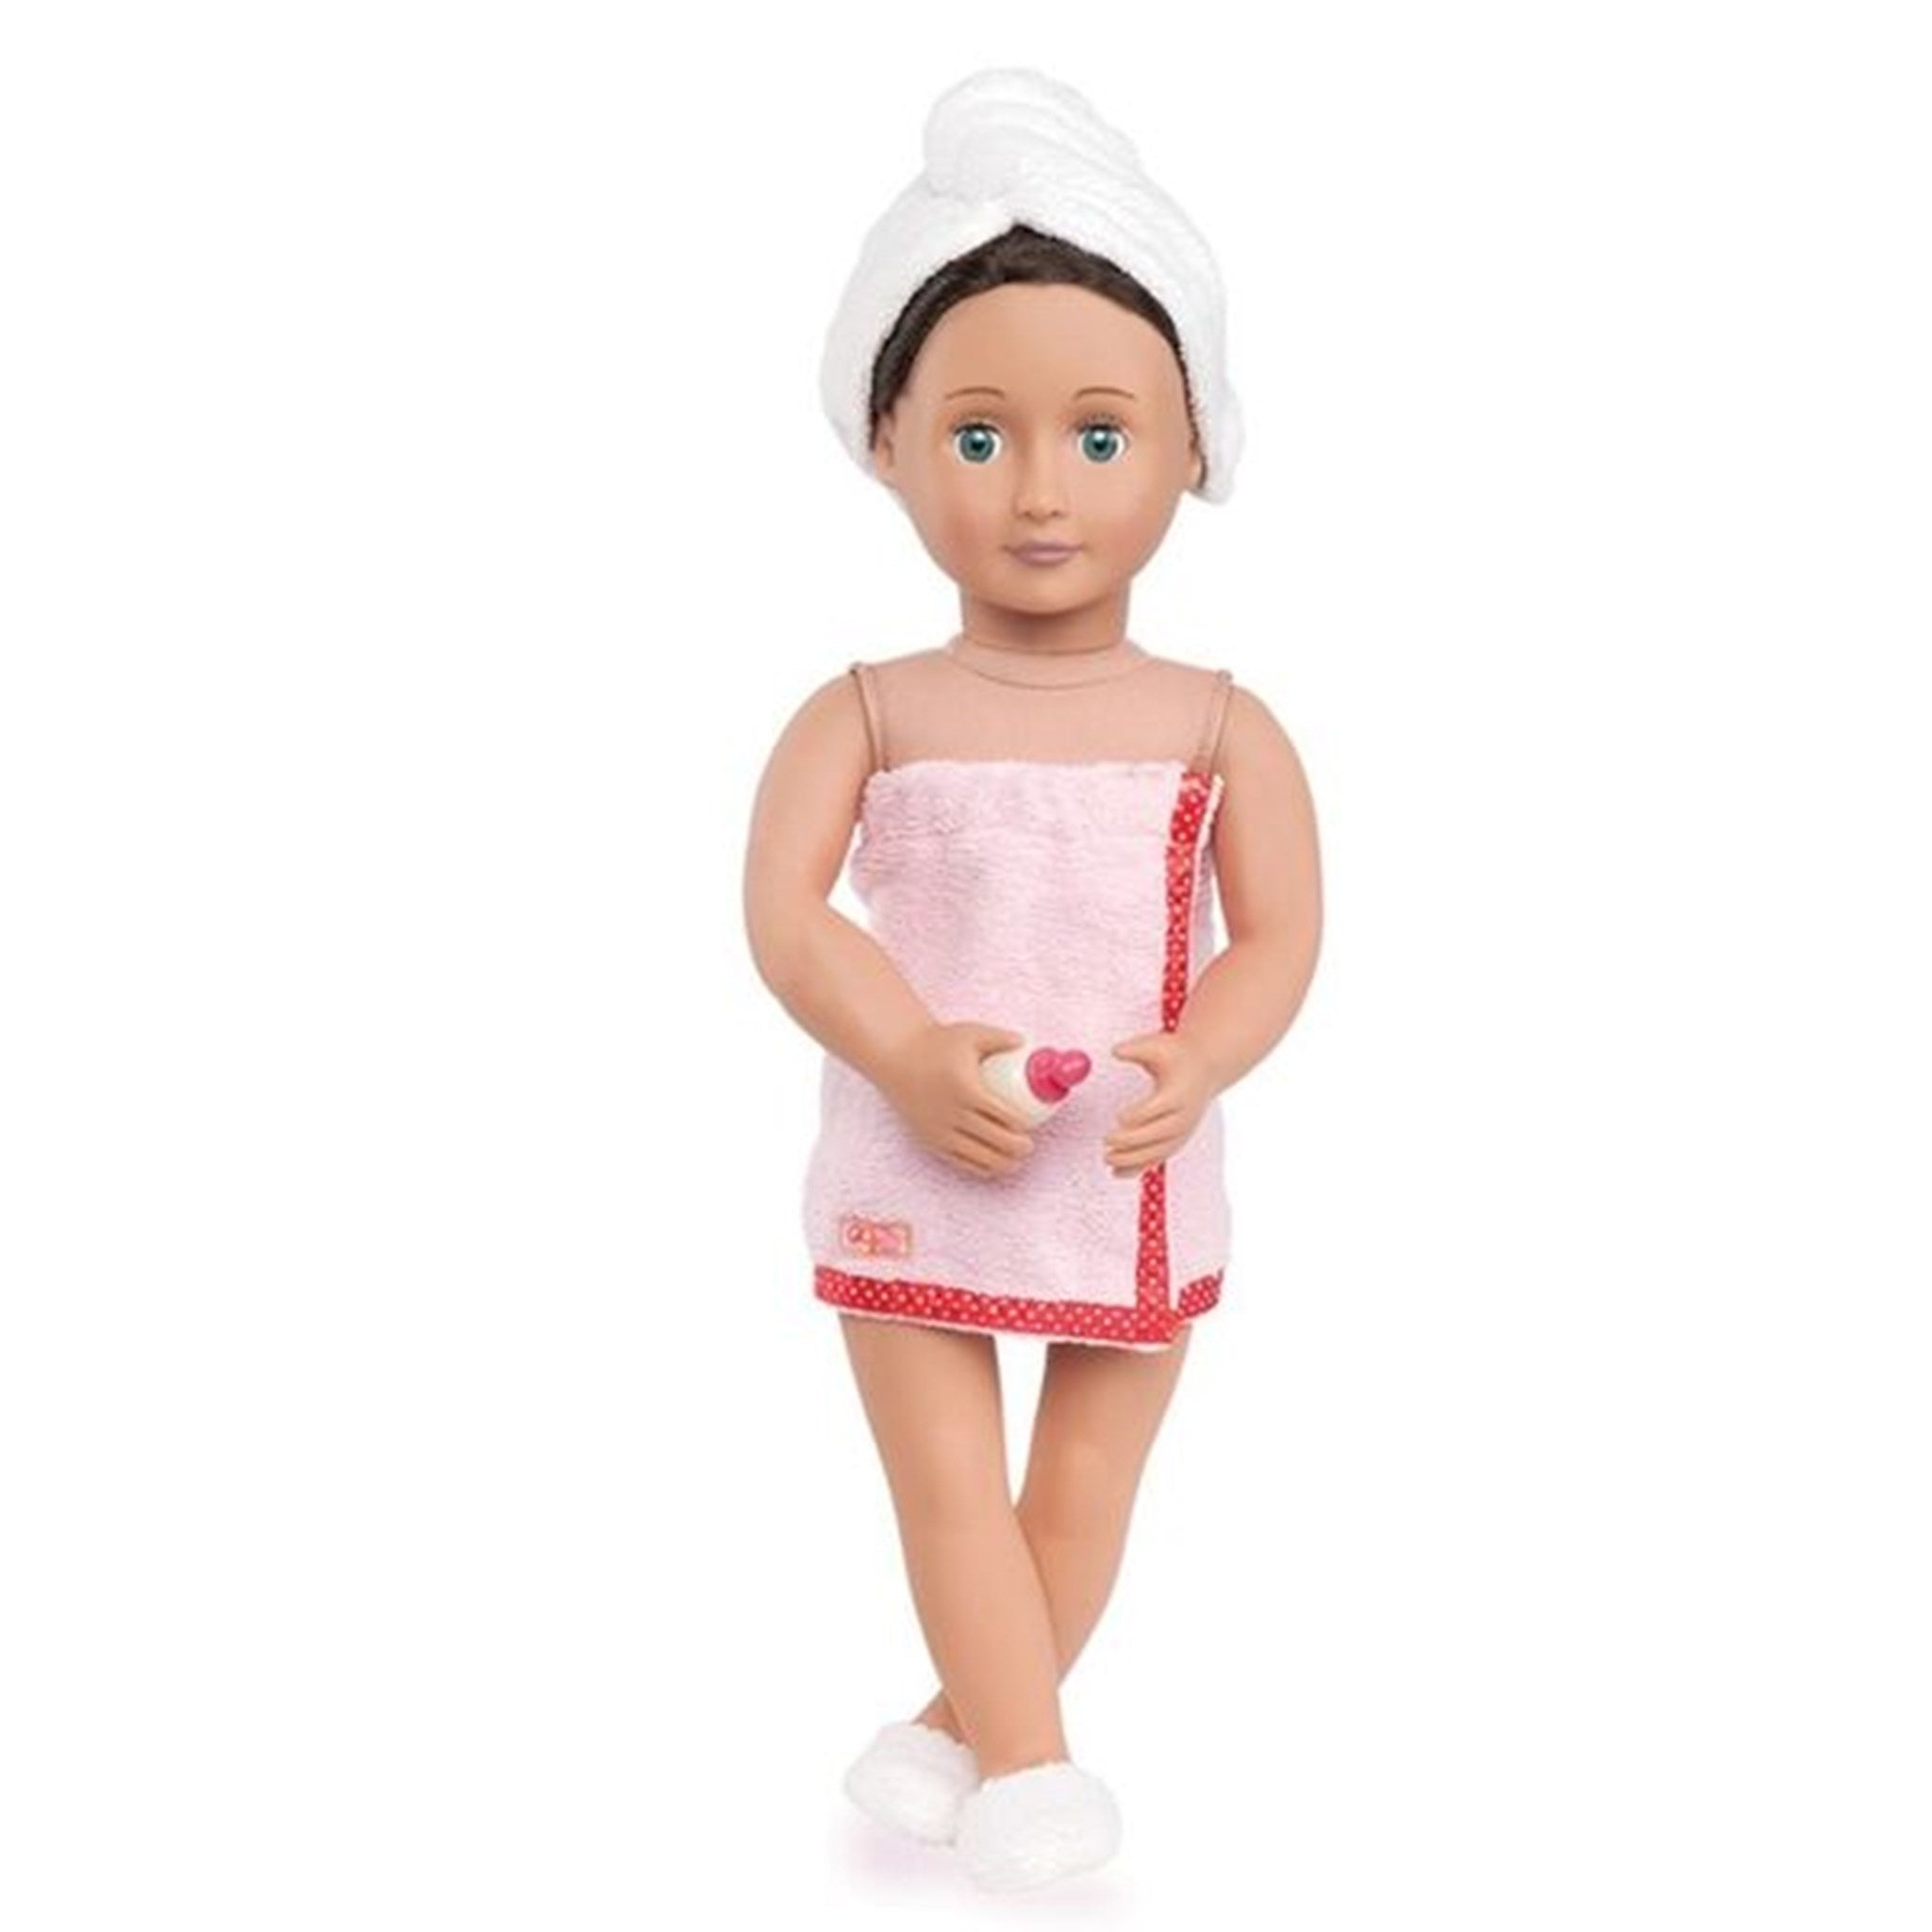 Our Generation Doll Accessories - Spa Set 3